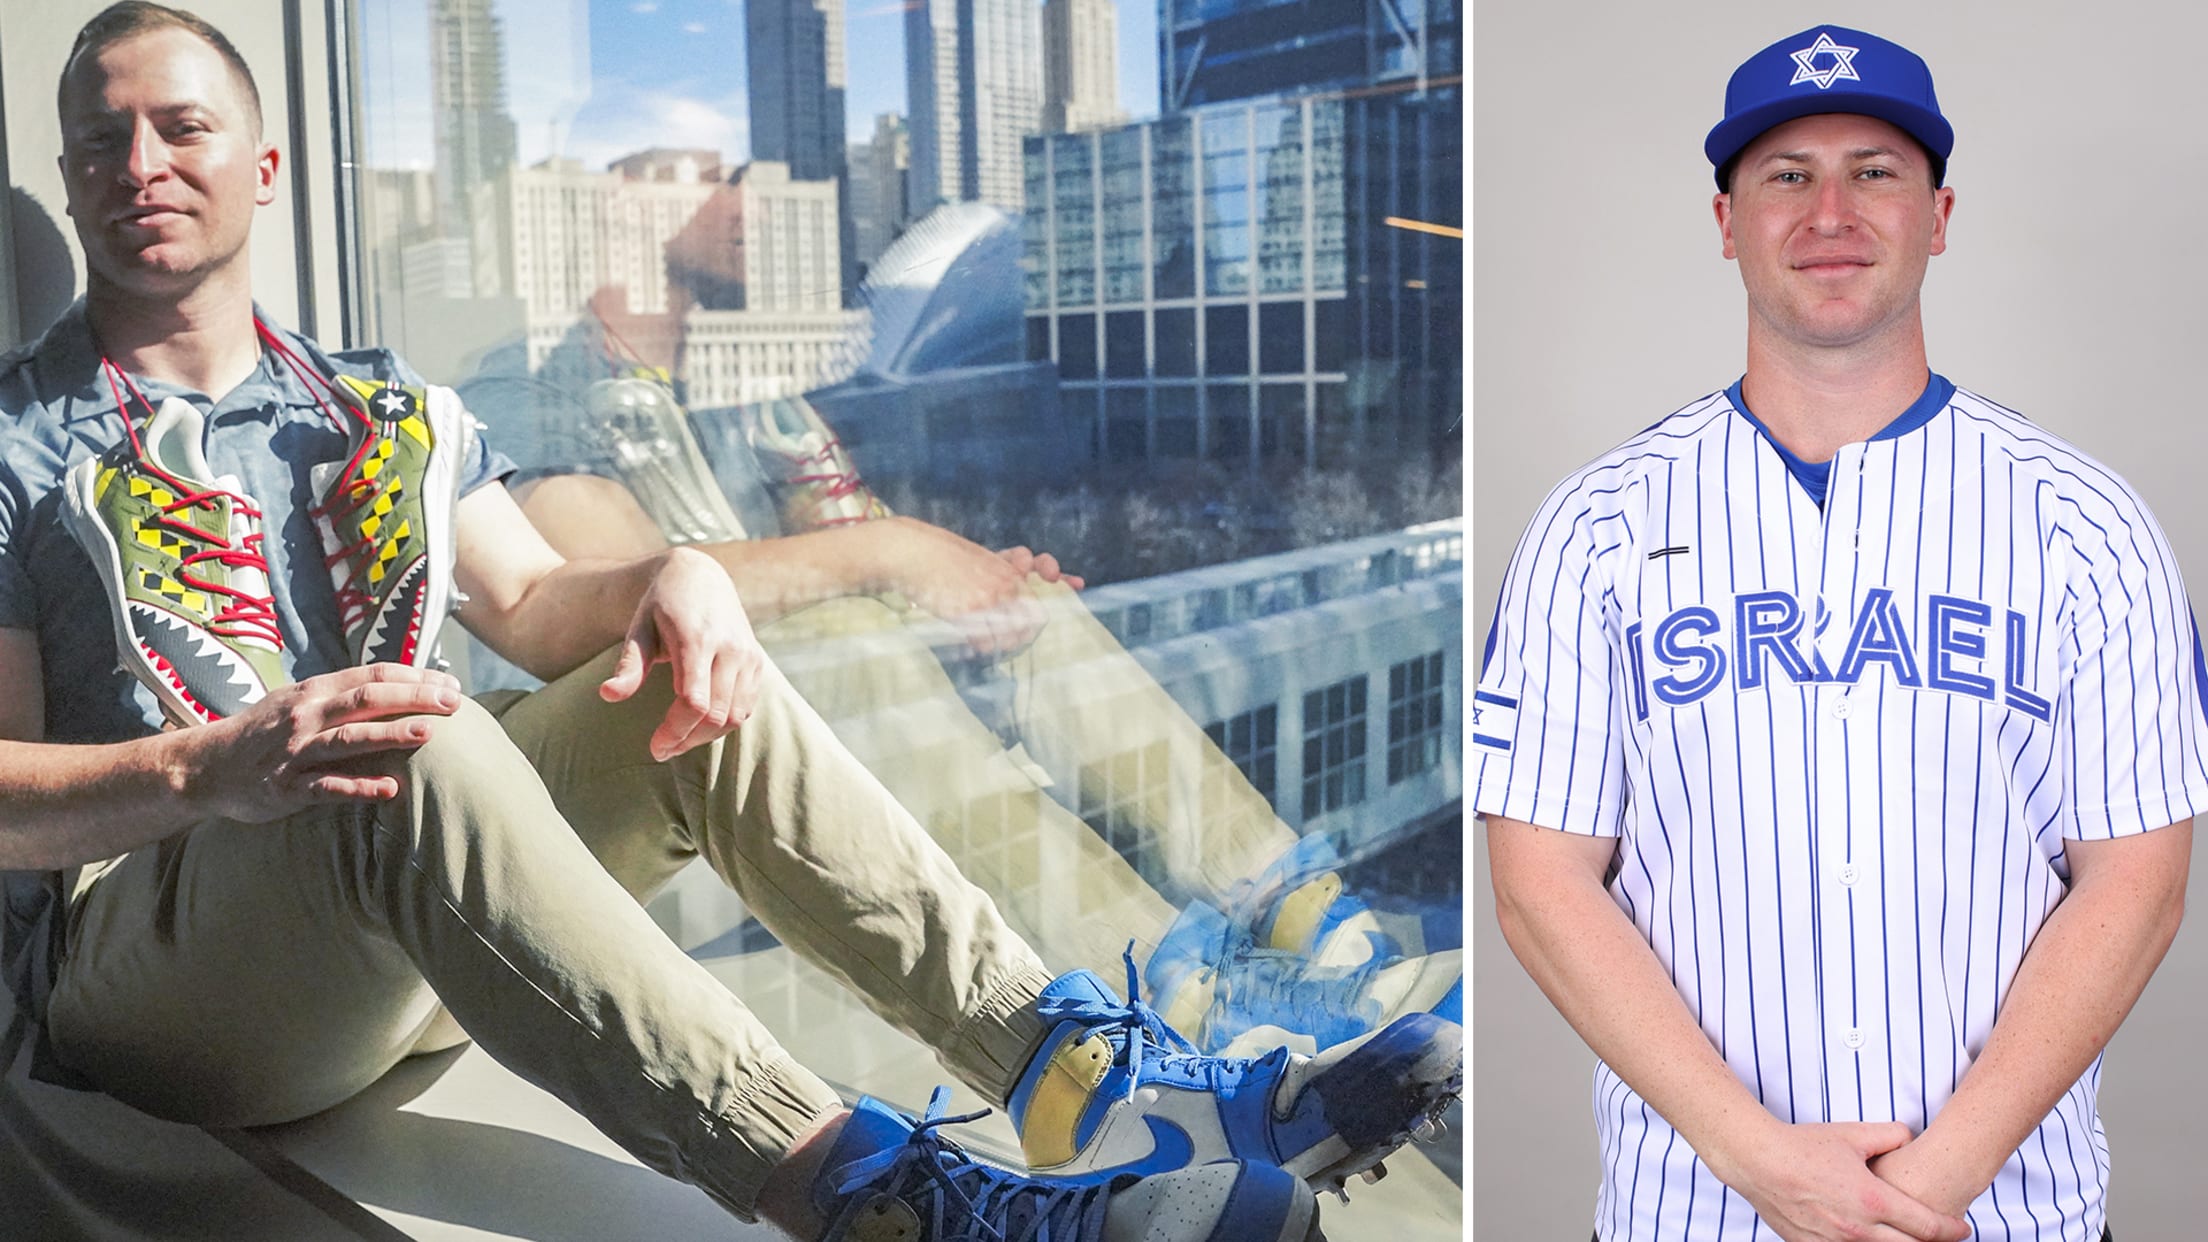 A split image of a man lounging in the window of a high-rise building and a portrait of him in an Israel baseball uniform